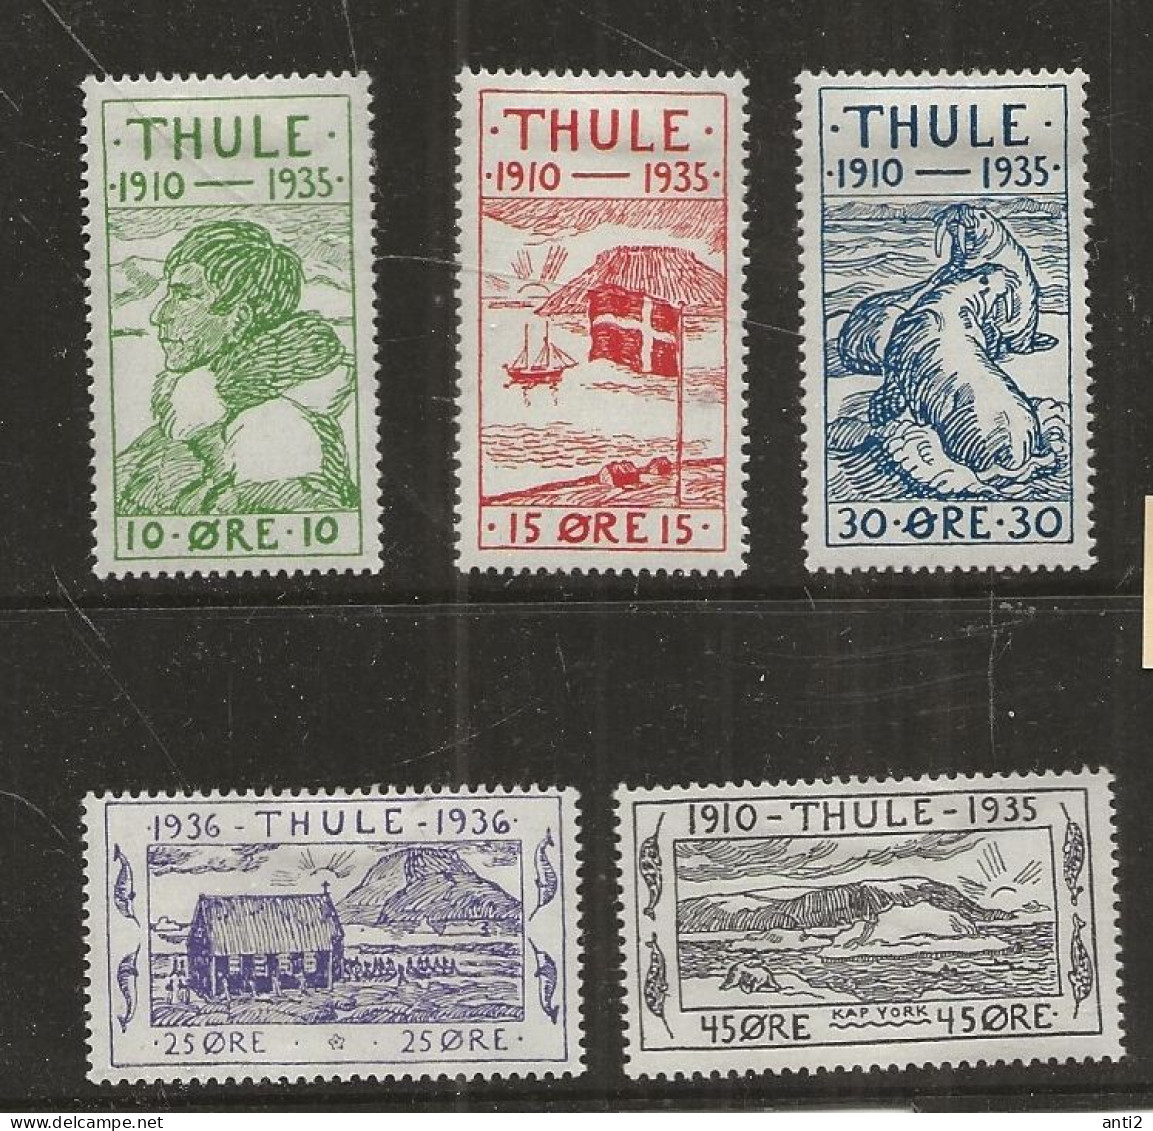 Greenland Thule 1935 25th Anniversary Of The Founding Of The Thule Settlement. Mi 1-5 Unused MH(*) - Thule